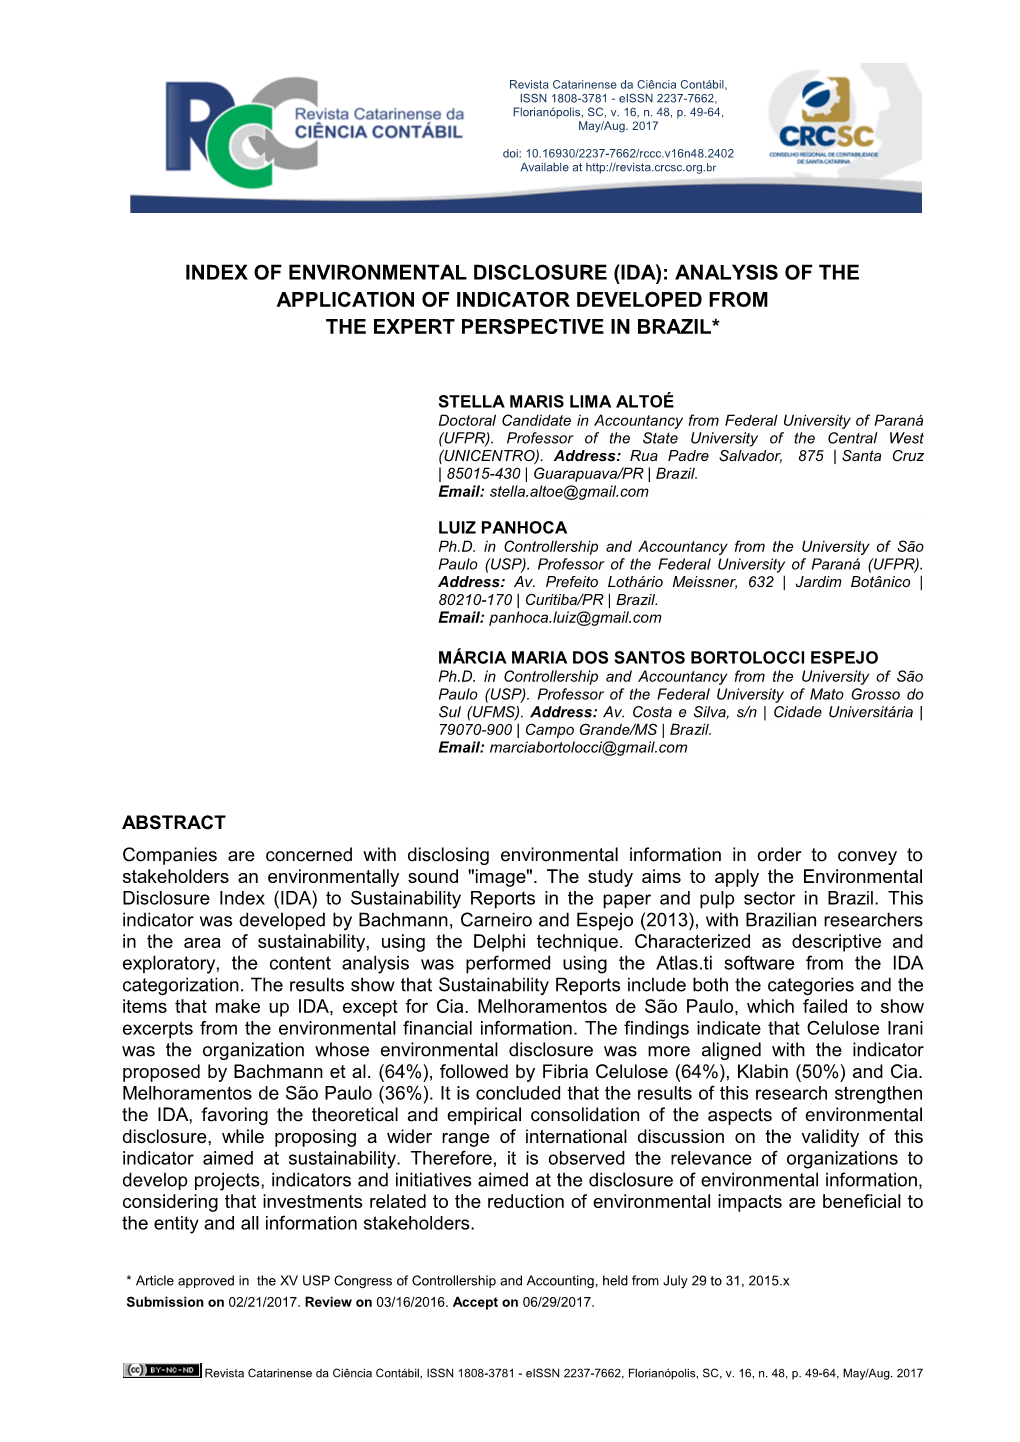 Index of Environmental Disclosure (Ida): Analysis of the Application of Indicator Developed from the Expert Perspective in Brazil*